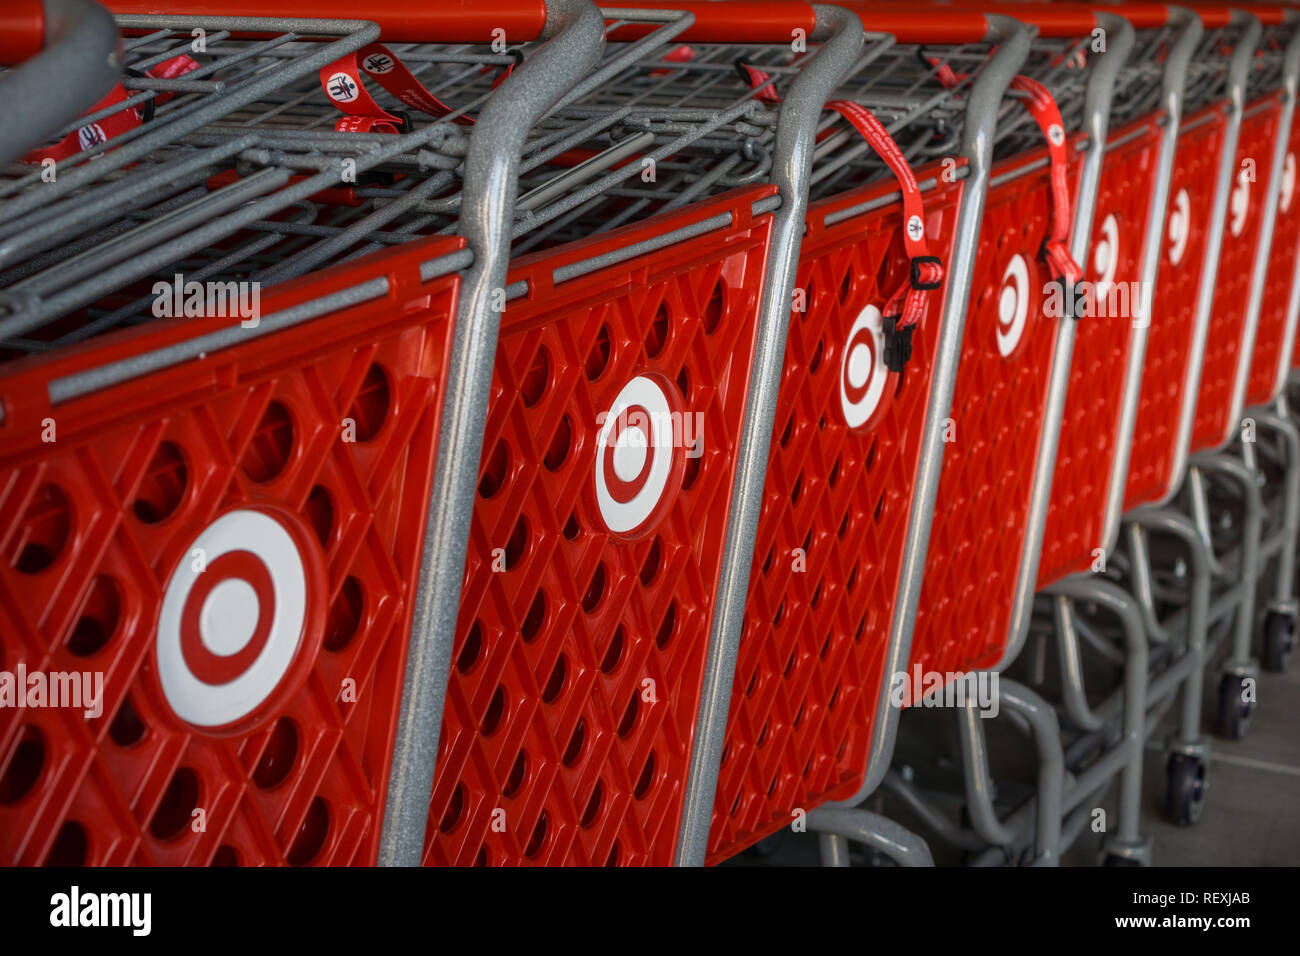 October 12, 2017 Sunnyvale/CA/USA - Stacked Target shopping carts with the company's logo on the side, a bulls eye Stock Photo